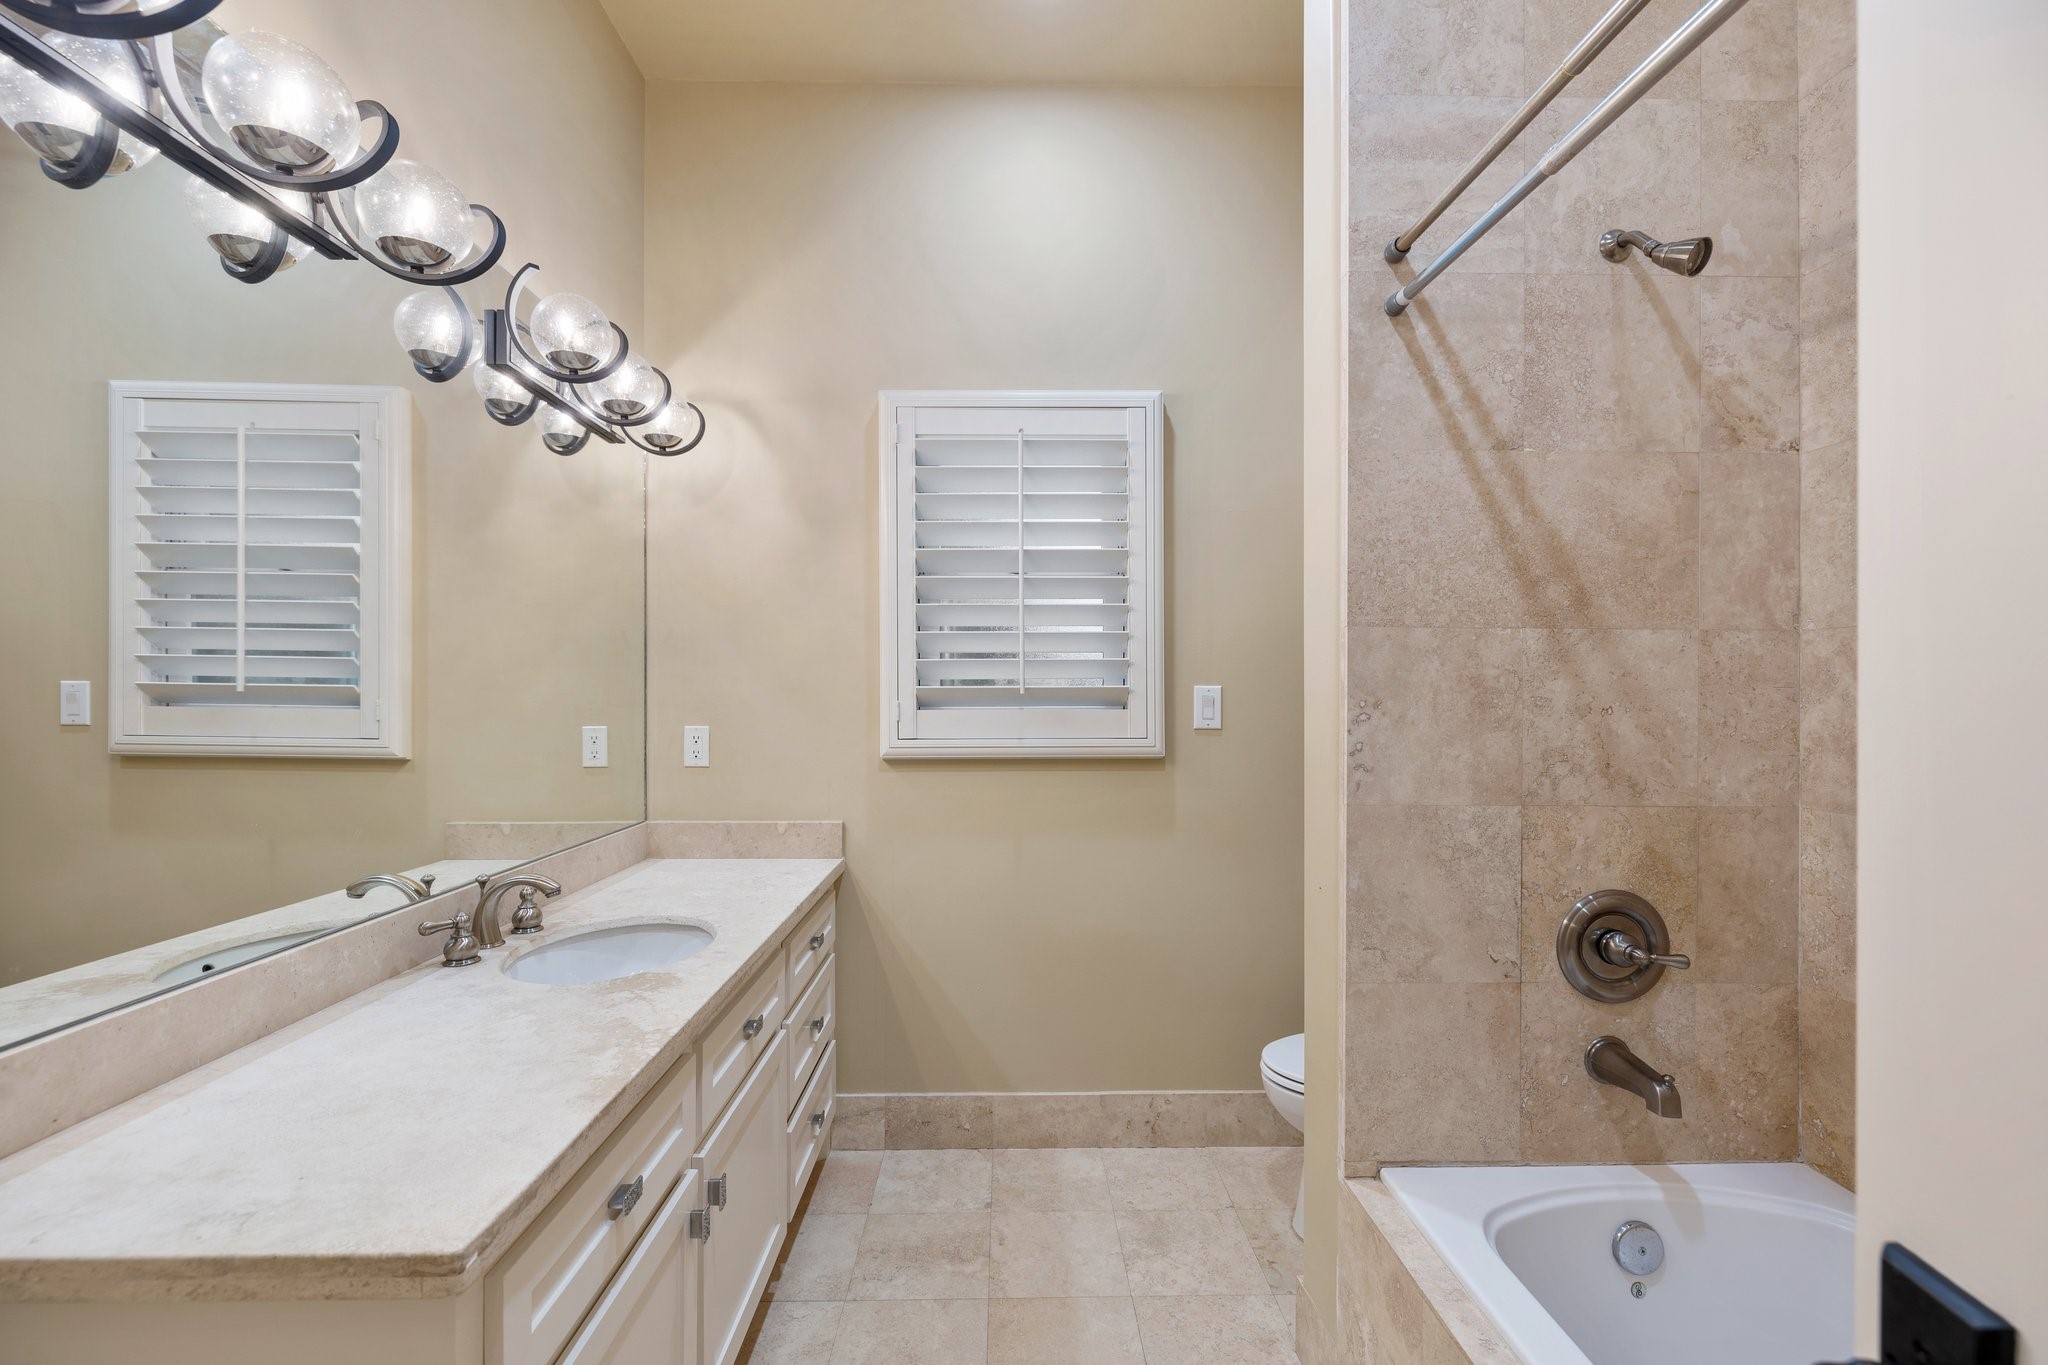 GUEST SUITE BATHROOM - Spacious bathroom with stone countertops and tub/shower combo with stone tile surround.